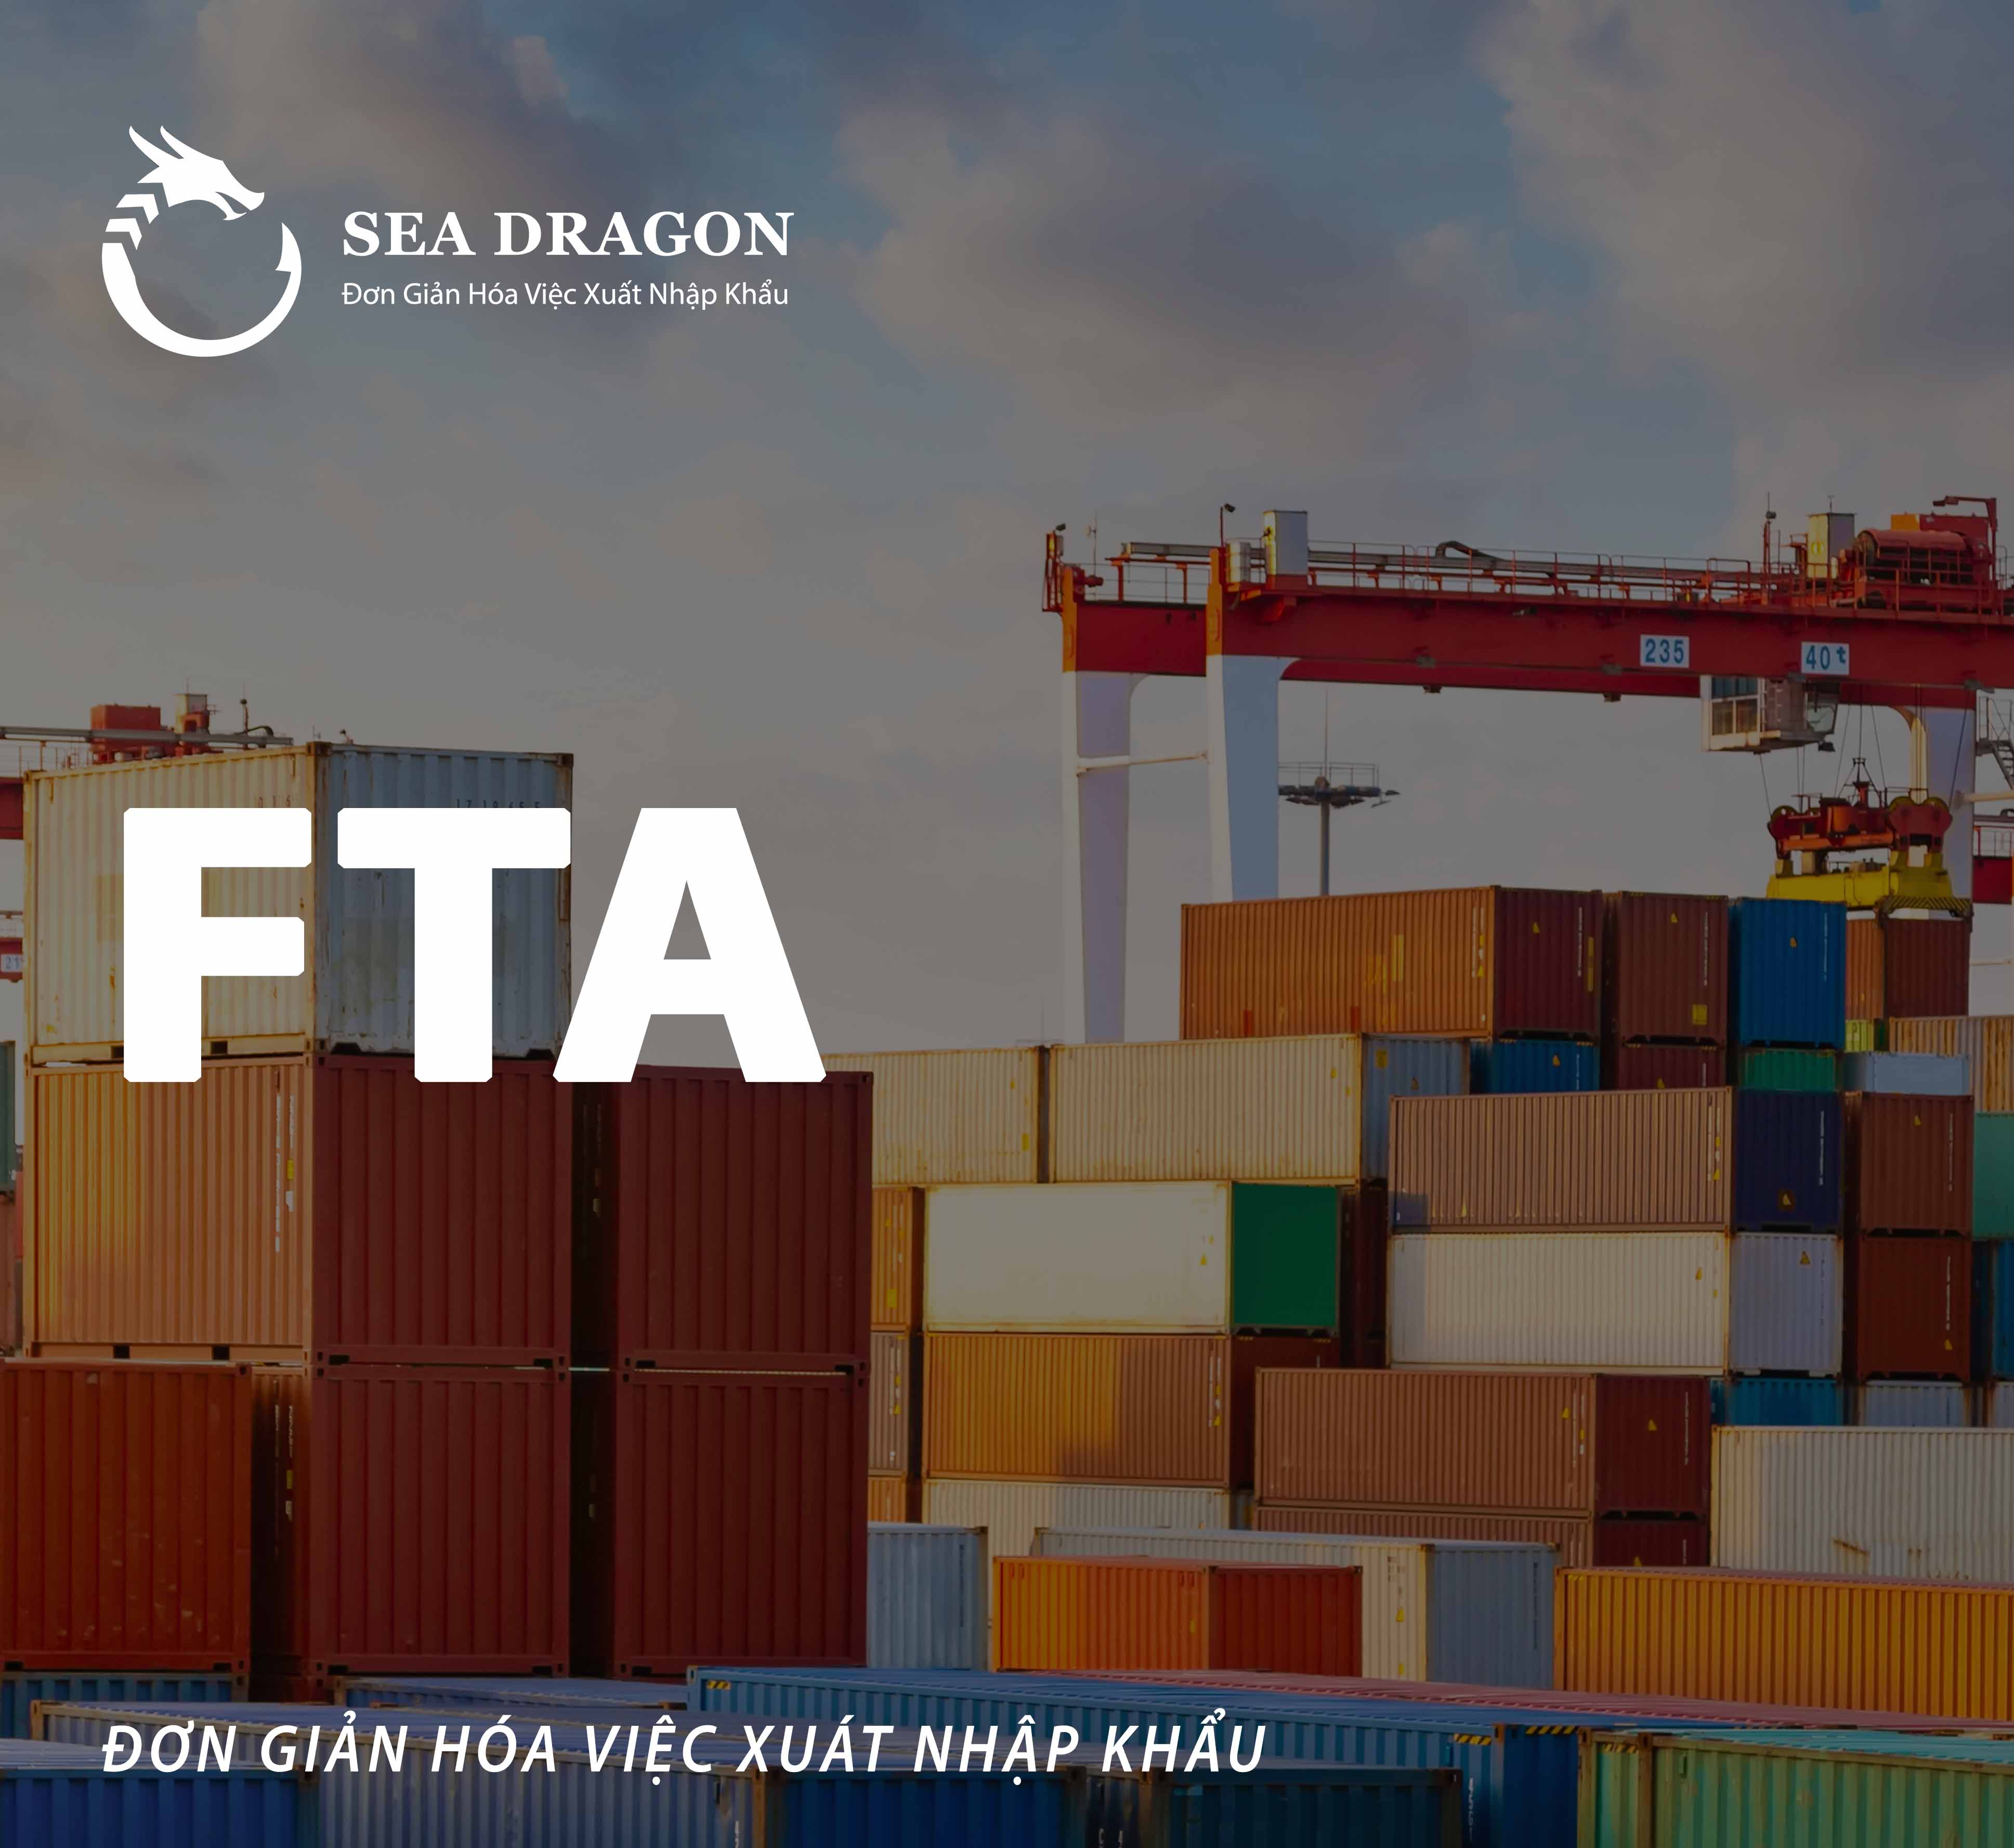 FREE TRADE AGREEMENTS (FTAs) BETWEEN VIETNAM AND OTHER COUNTRIES